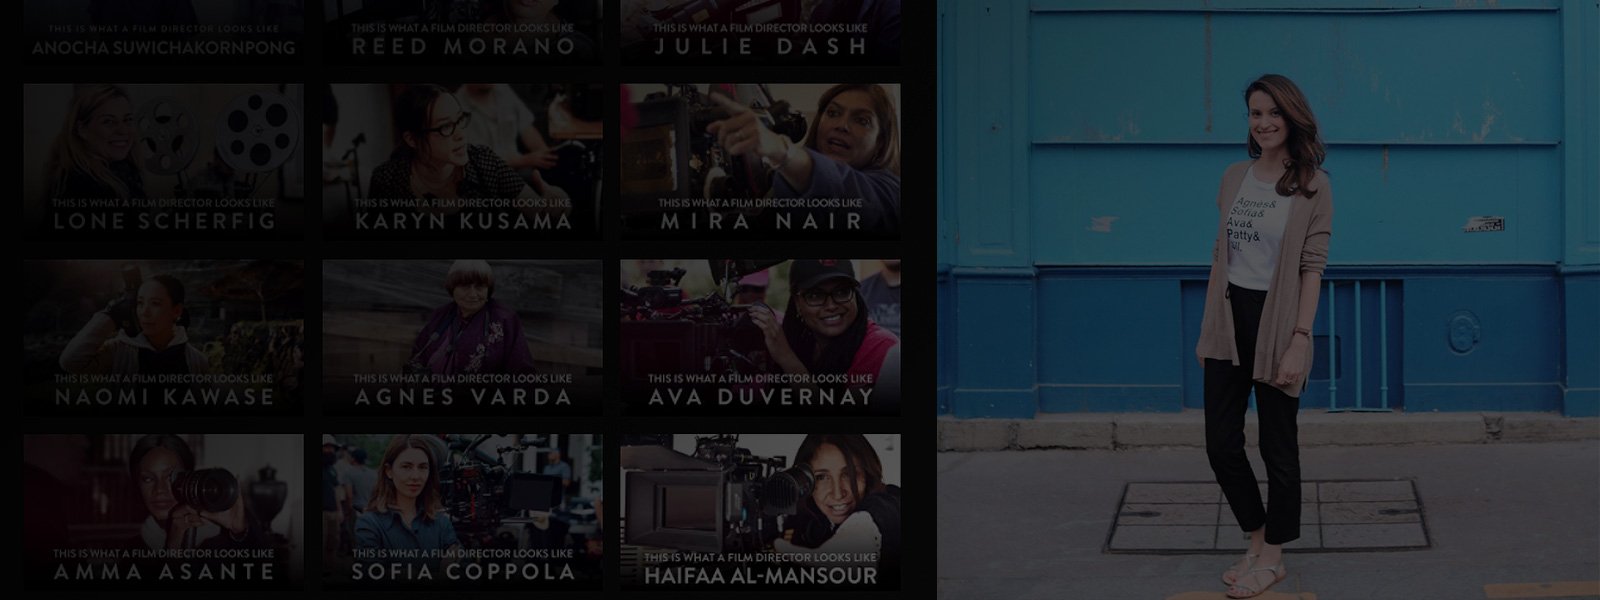 Harnessing the power of the internet to give more visibility to women directors